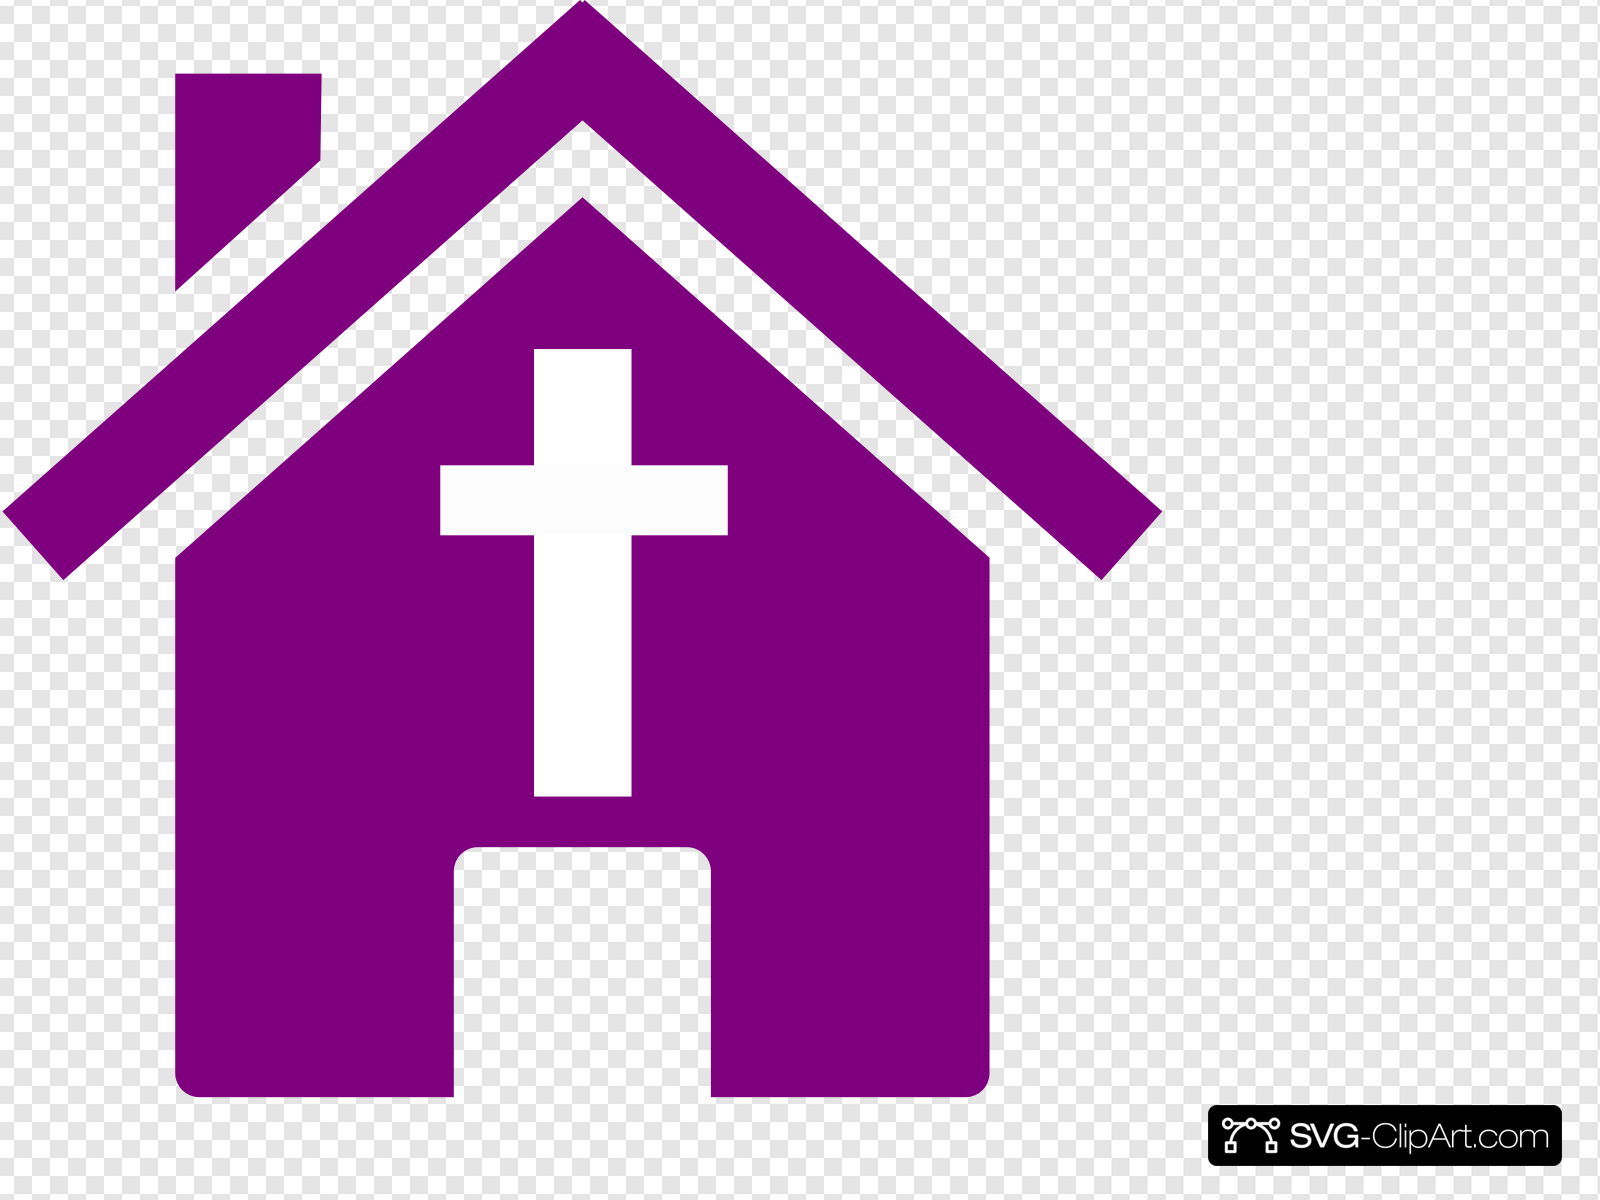 Purple Church House Clip art, Icon and SVG.